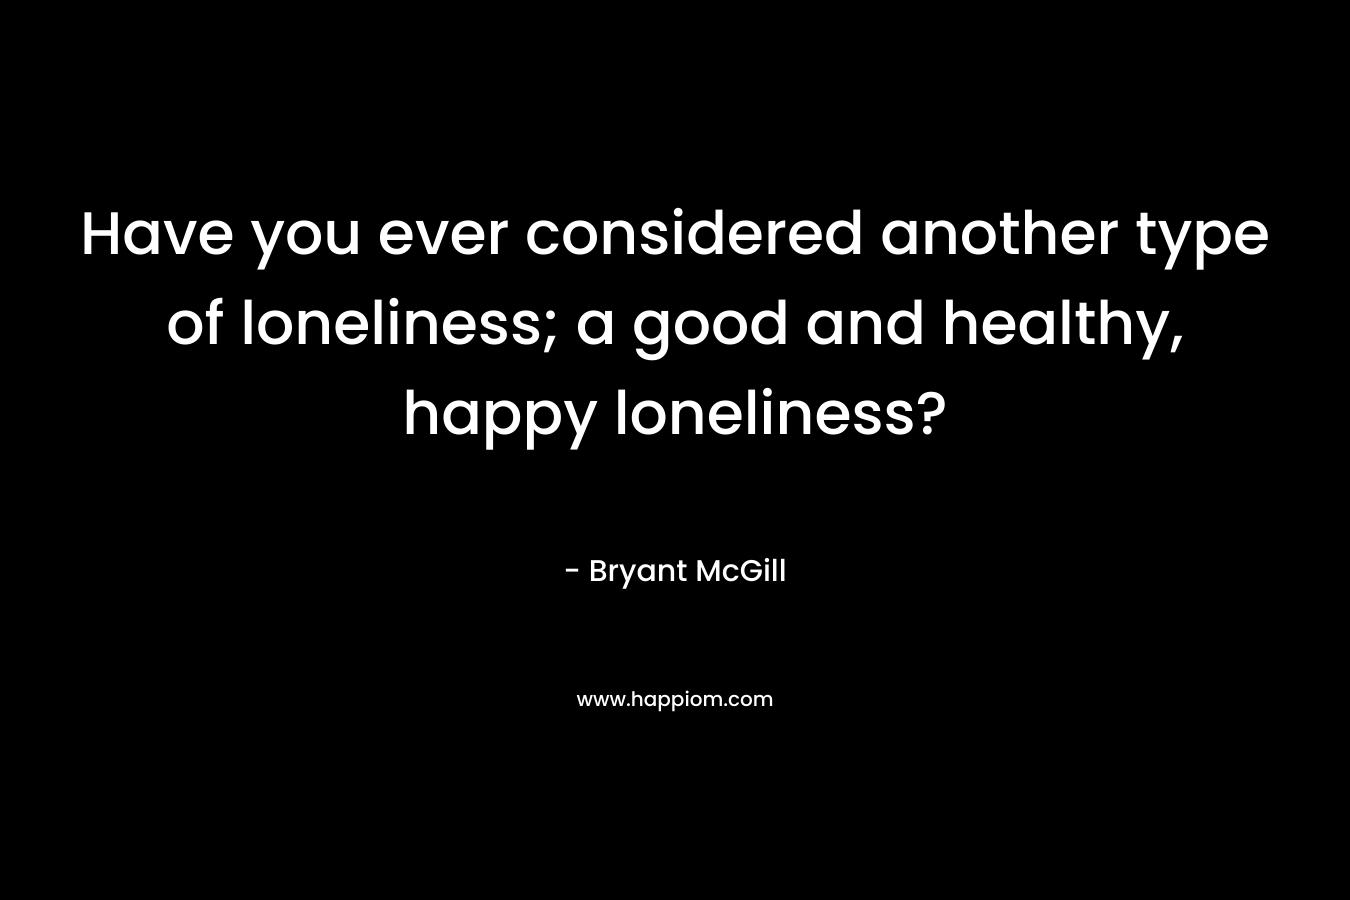 Have you ever considered another type of loneliness; a good and healthy, happy loneliness?